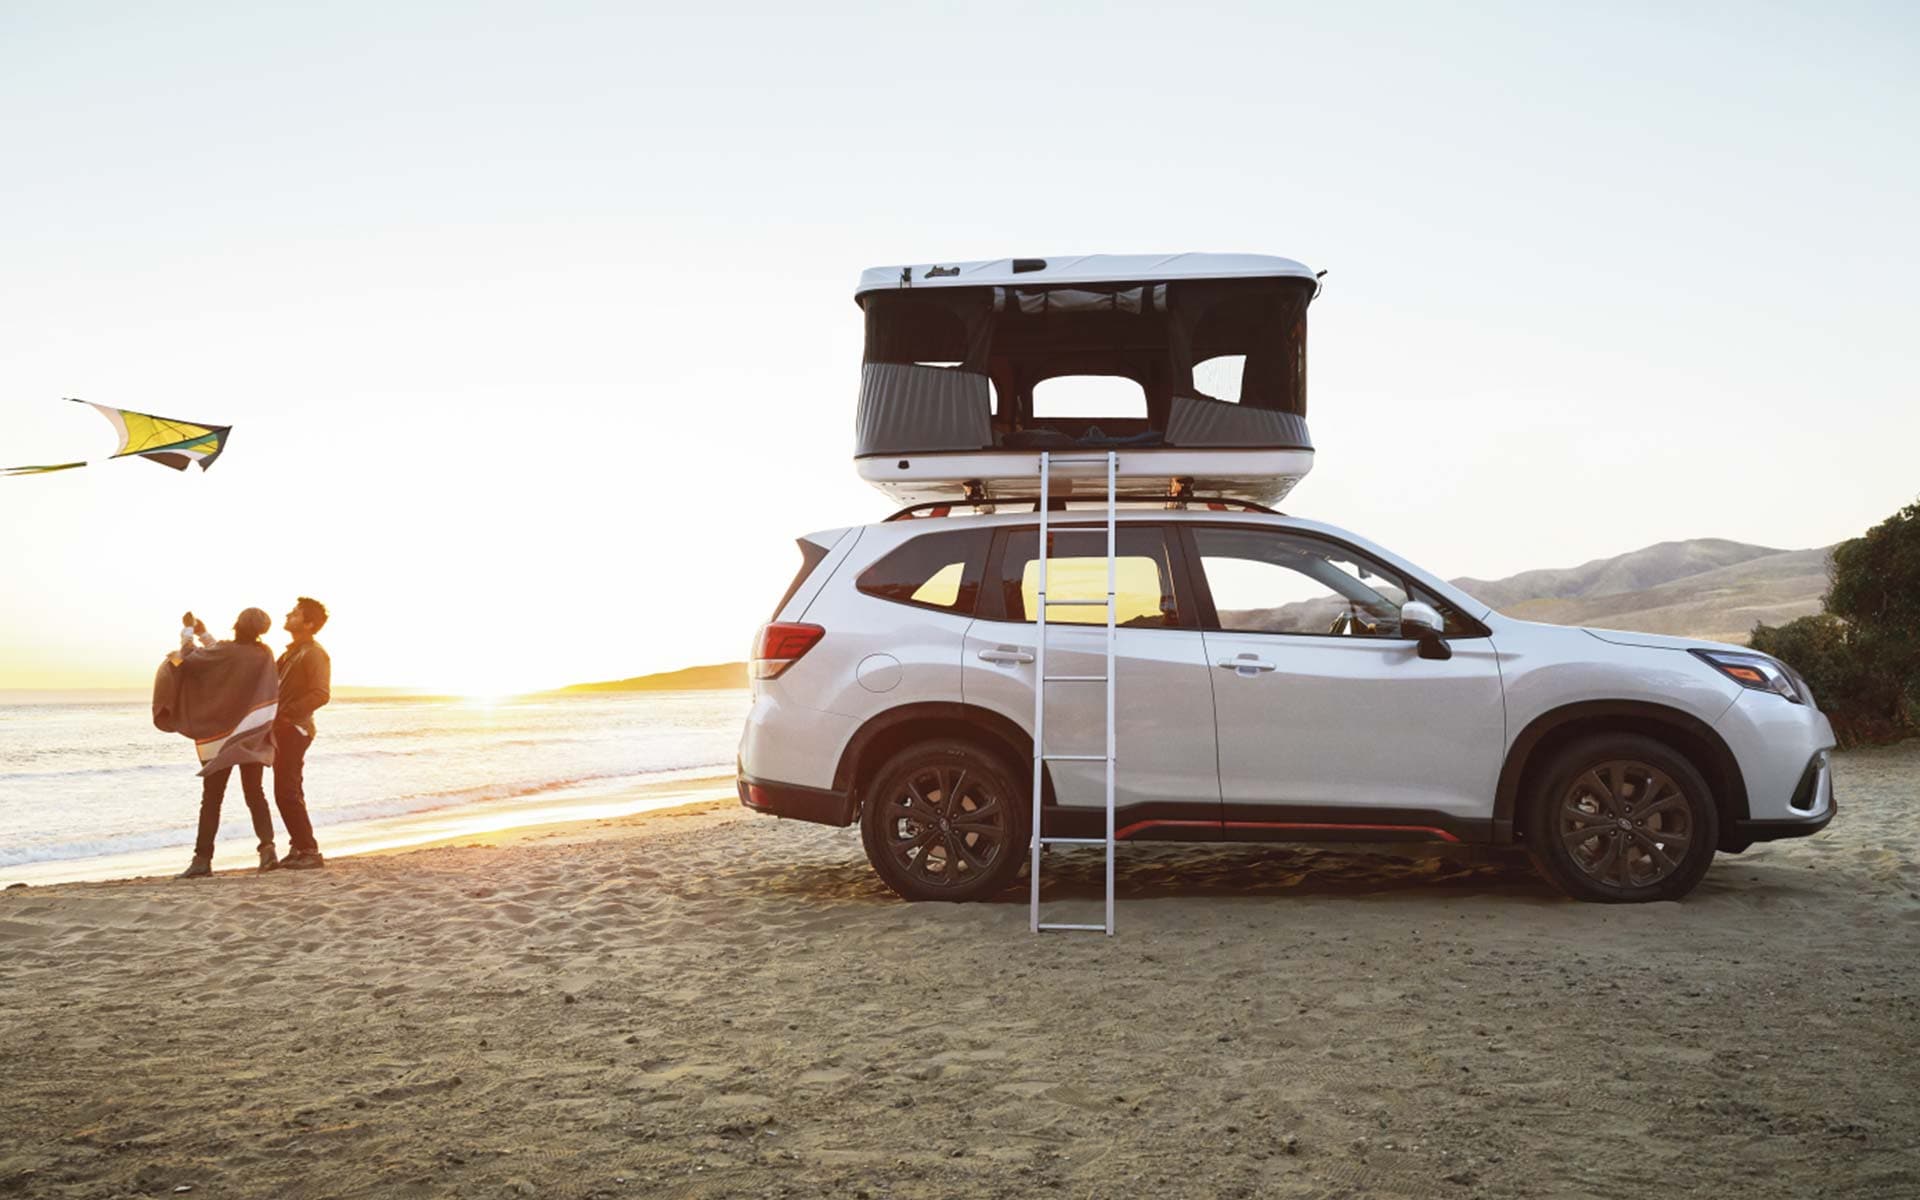 The 2022 Forester Sport parked on a beach with roof tent.